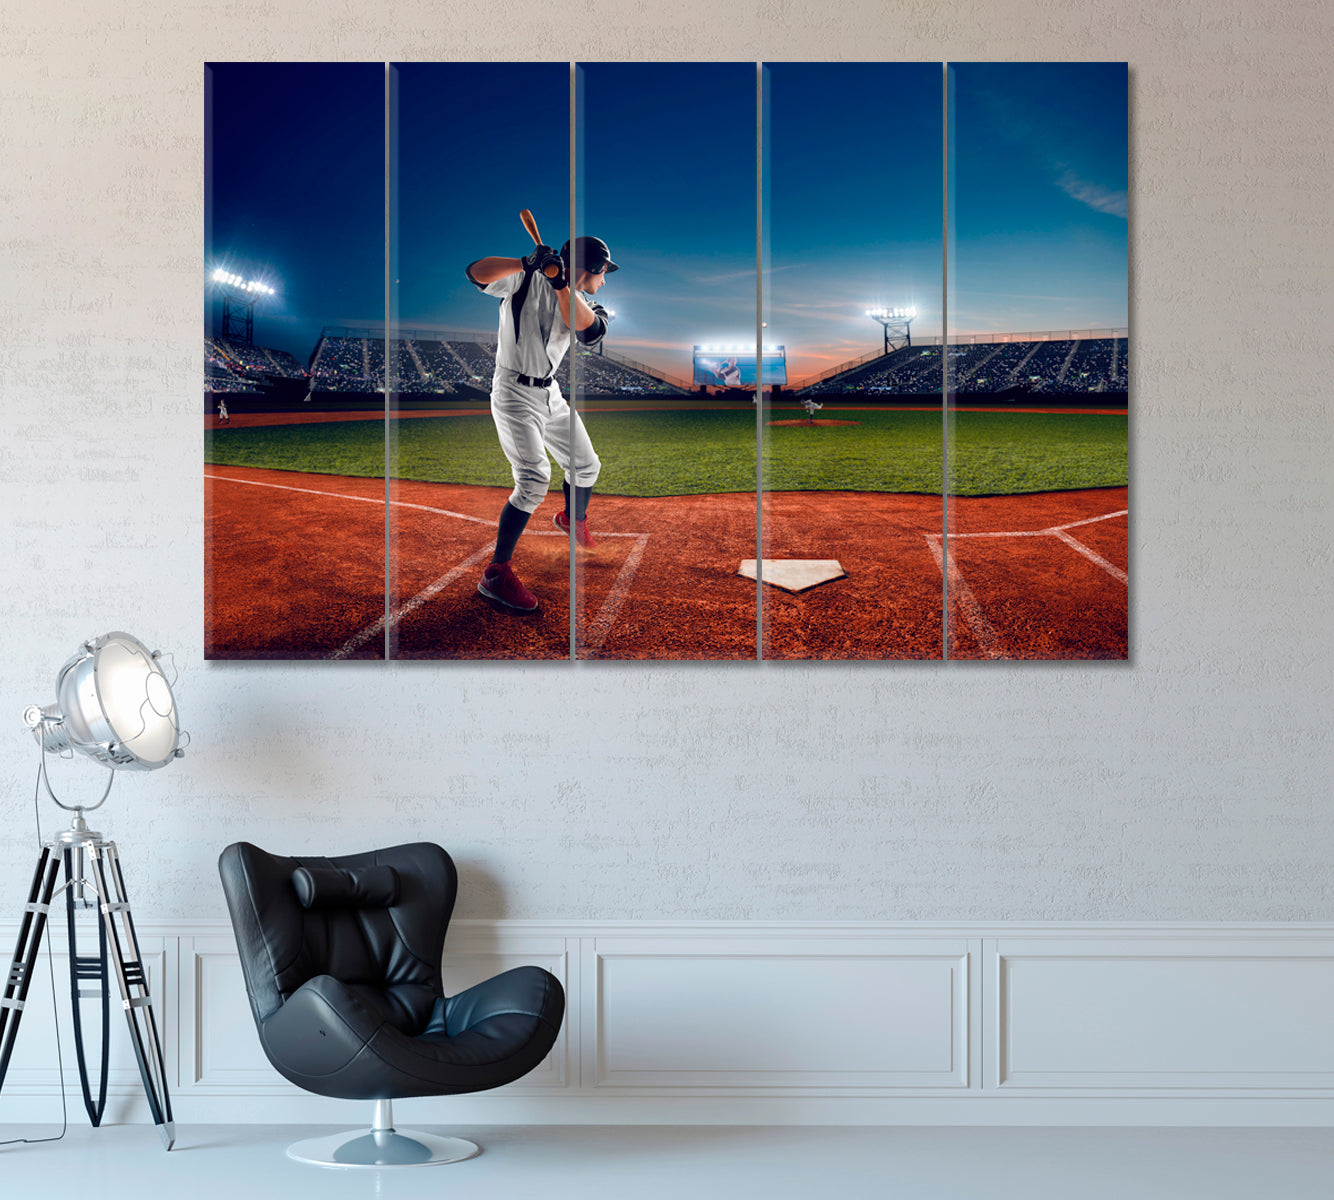 Baseball Player During Game Canvas Print ArtLexy 5 Panels 36"x24" inches 